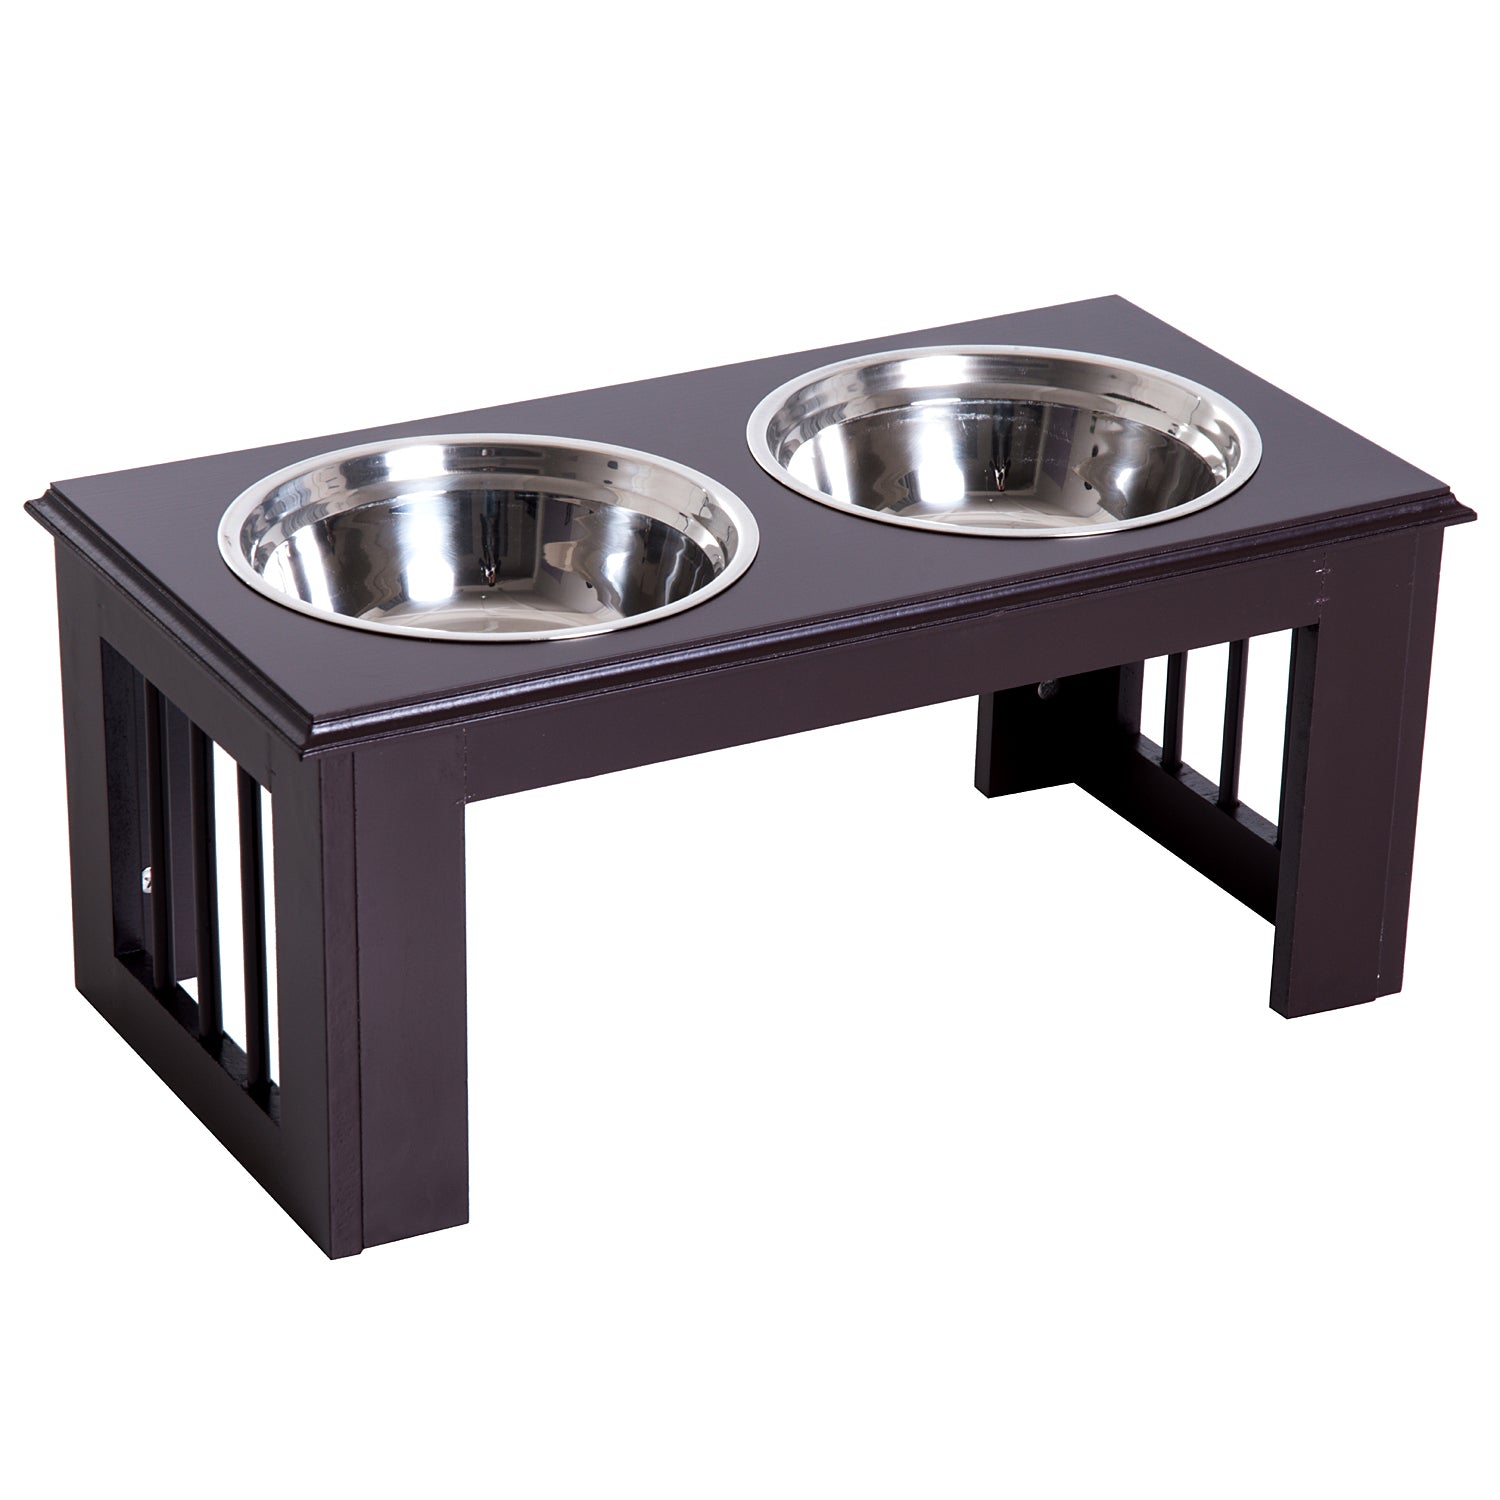 Stainless Steel Pet Feeder , 58.4Lx30.5Wx25.4H cm-Brown